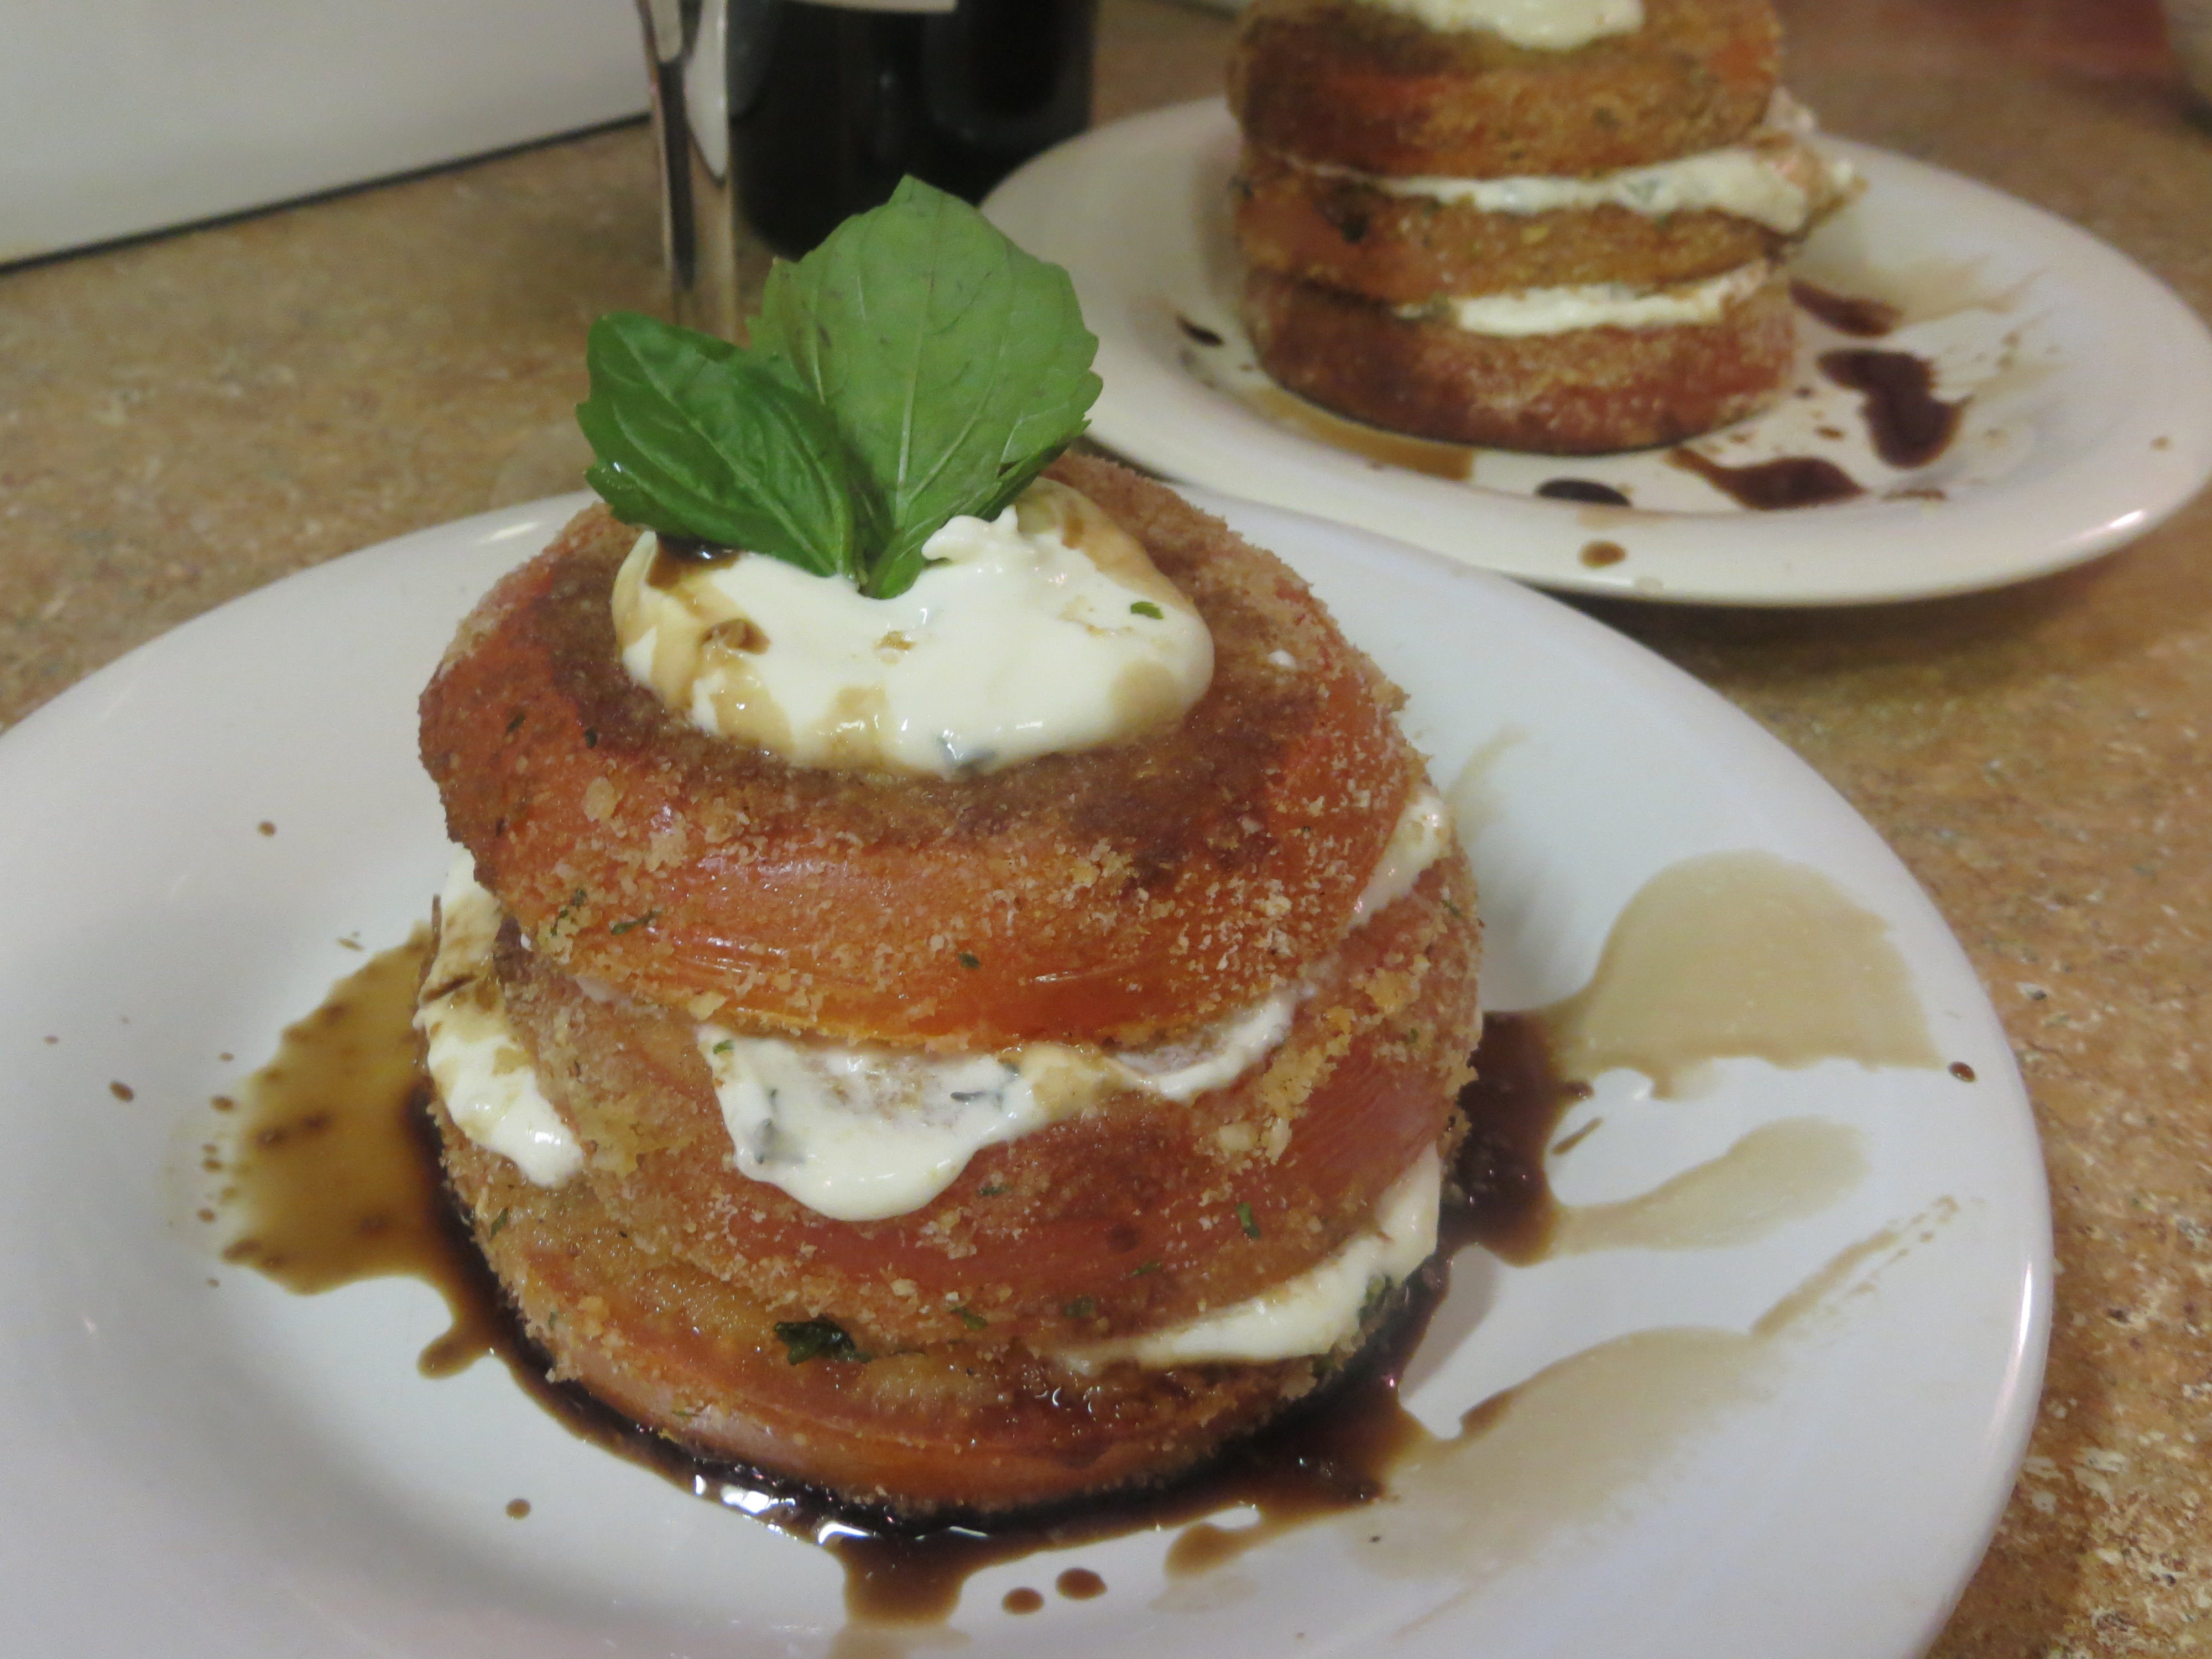 Three-layered Breaded Tomatoes Napoleon with balsamic drizzled around the edges for dipping.